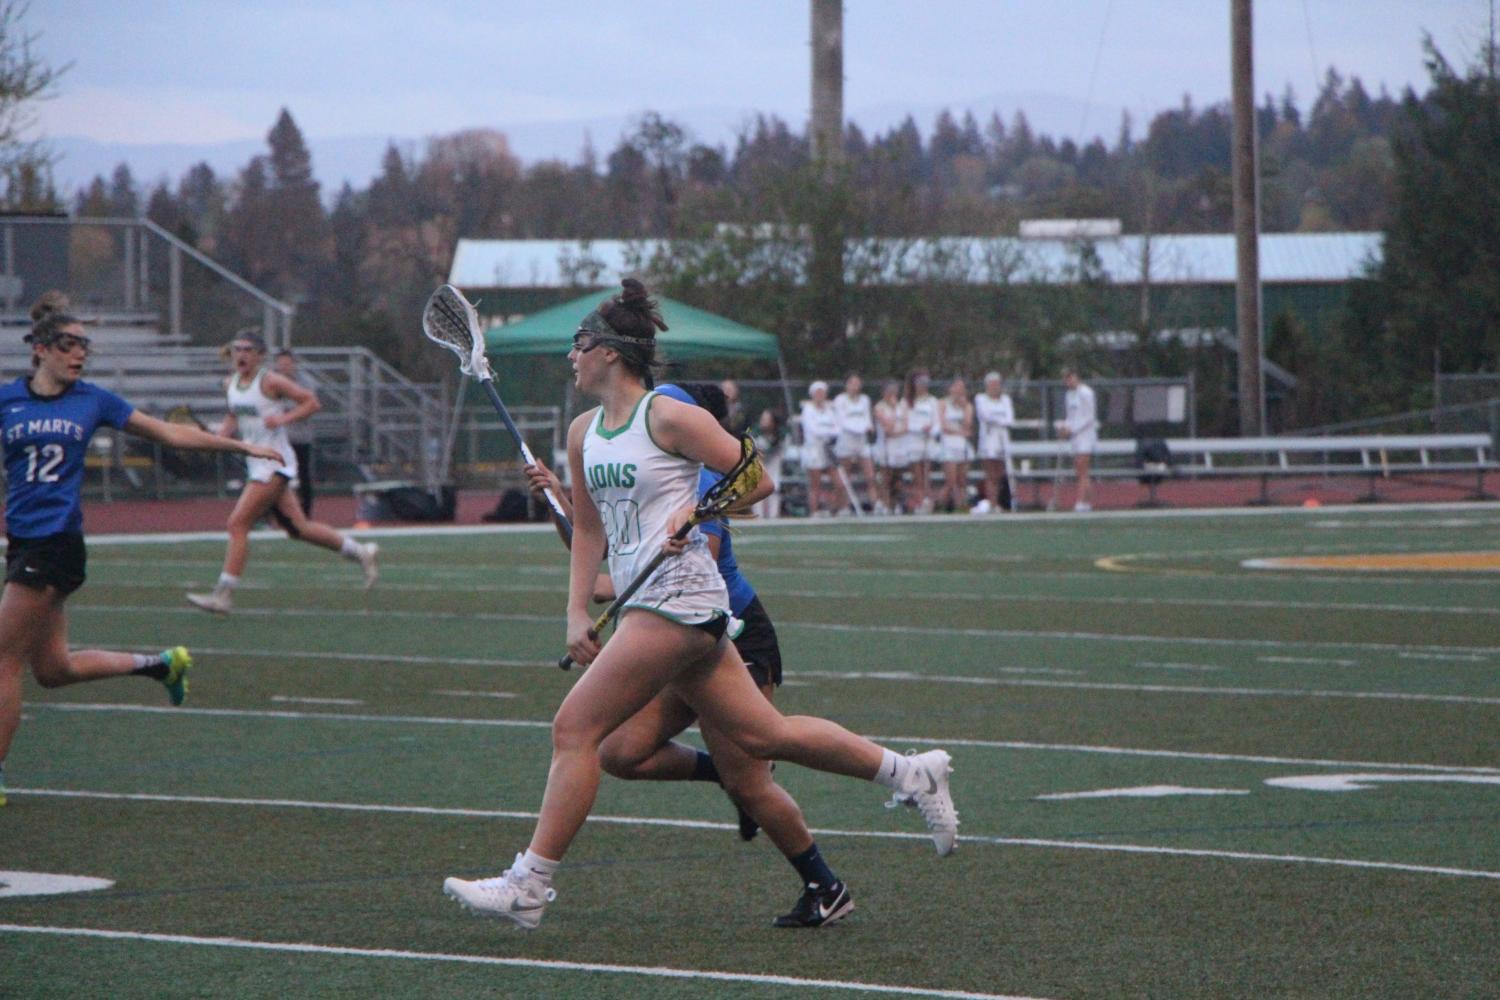 En+route+to+her+second+goal+of+the+night%2C+Ragen+Finklea%2C+sophomore%2C+leads+the+team+to+victory+on+Tuesday+against+St.+Mary%E2%80%99s+high+school.+Finklea+plays+club+lacrosse+when+the+high+school+season+is+off%2C+helping+her+land+a+spot+on+varsity+for+the+second+year+in+a+row.+%E2%80%9CRagen+is+a+really+good+all+around+player%2C%E2%80%9D+teammate+Carey+Stell%2C+freshman%2C+said.+%E2%80%9CShe+likes+to+play+with+the+team+instead+of+a+one+man+show%2C+which+helps+us+to+grow+team+chemistry.+Overall%2C+she%E2%80%99s+a+great+teammate+to+play+with.%E2%80%9D+